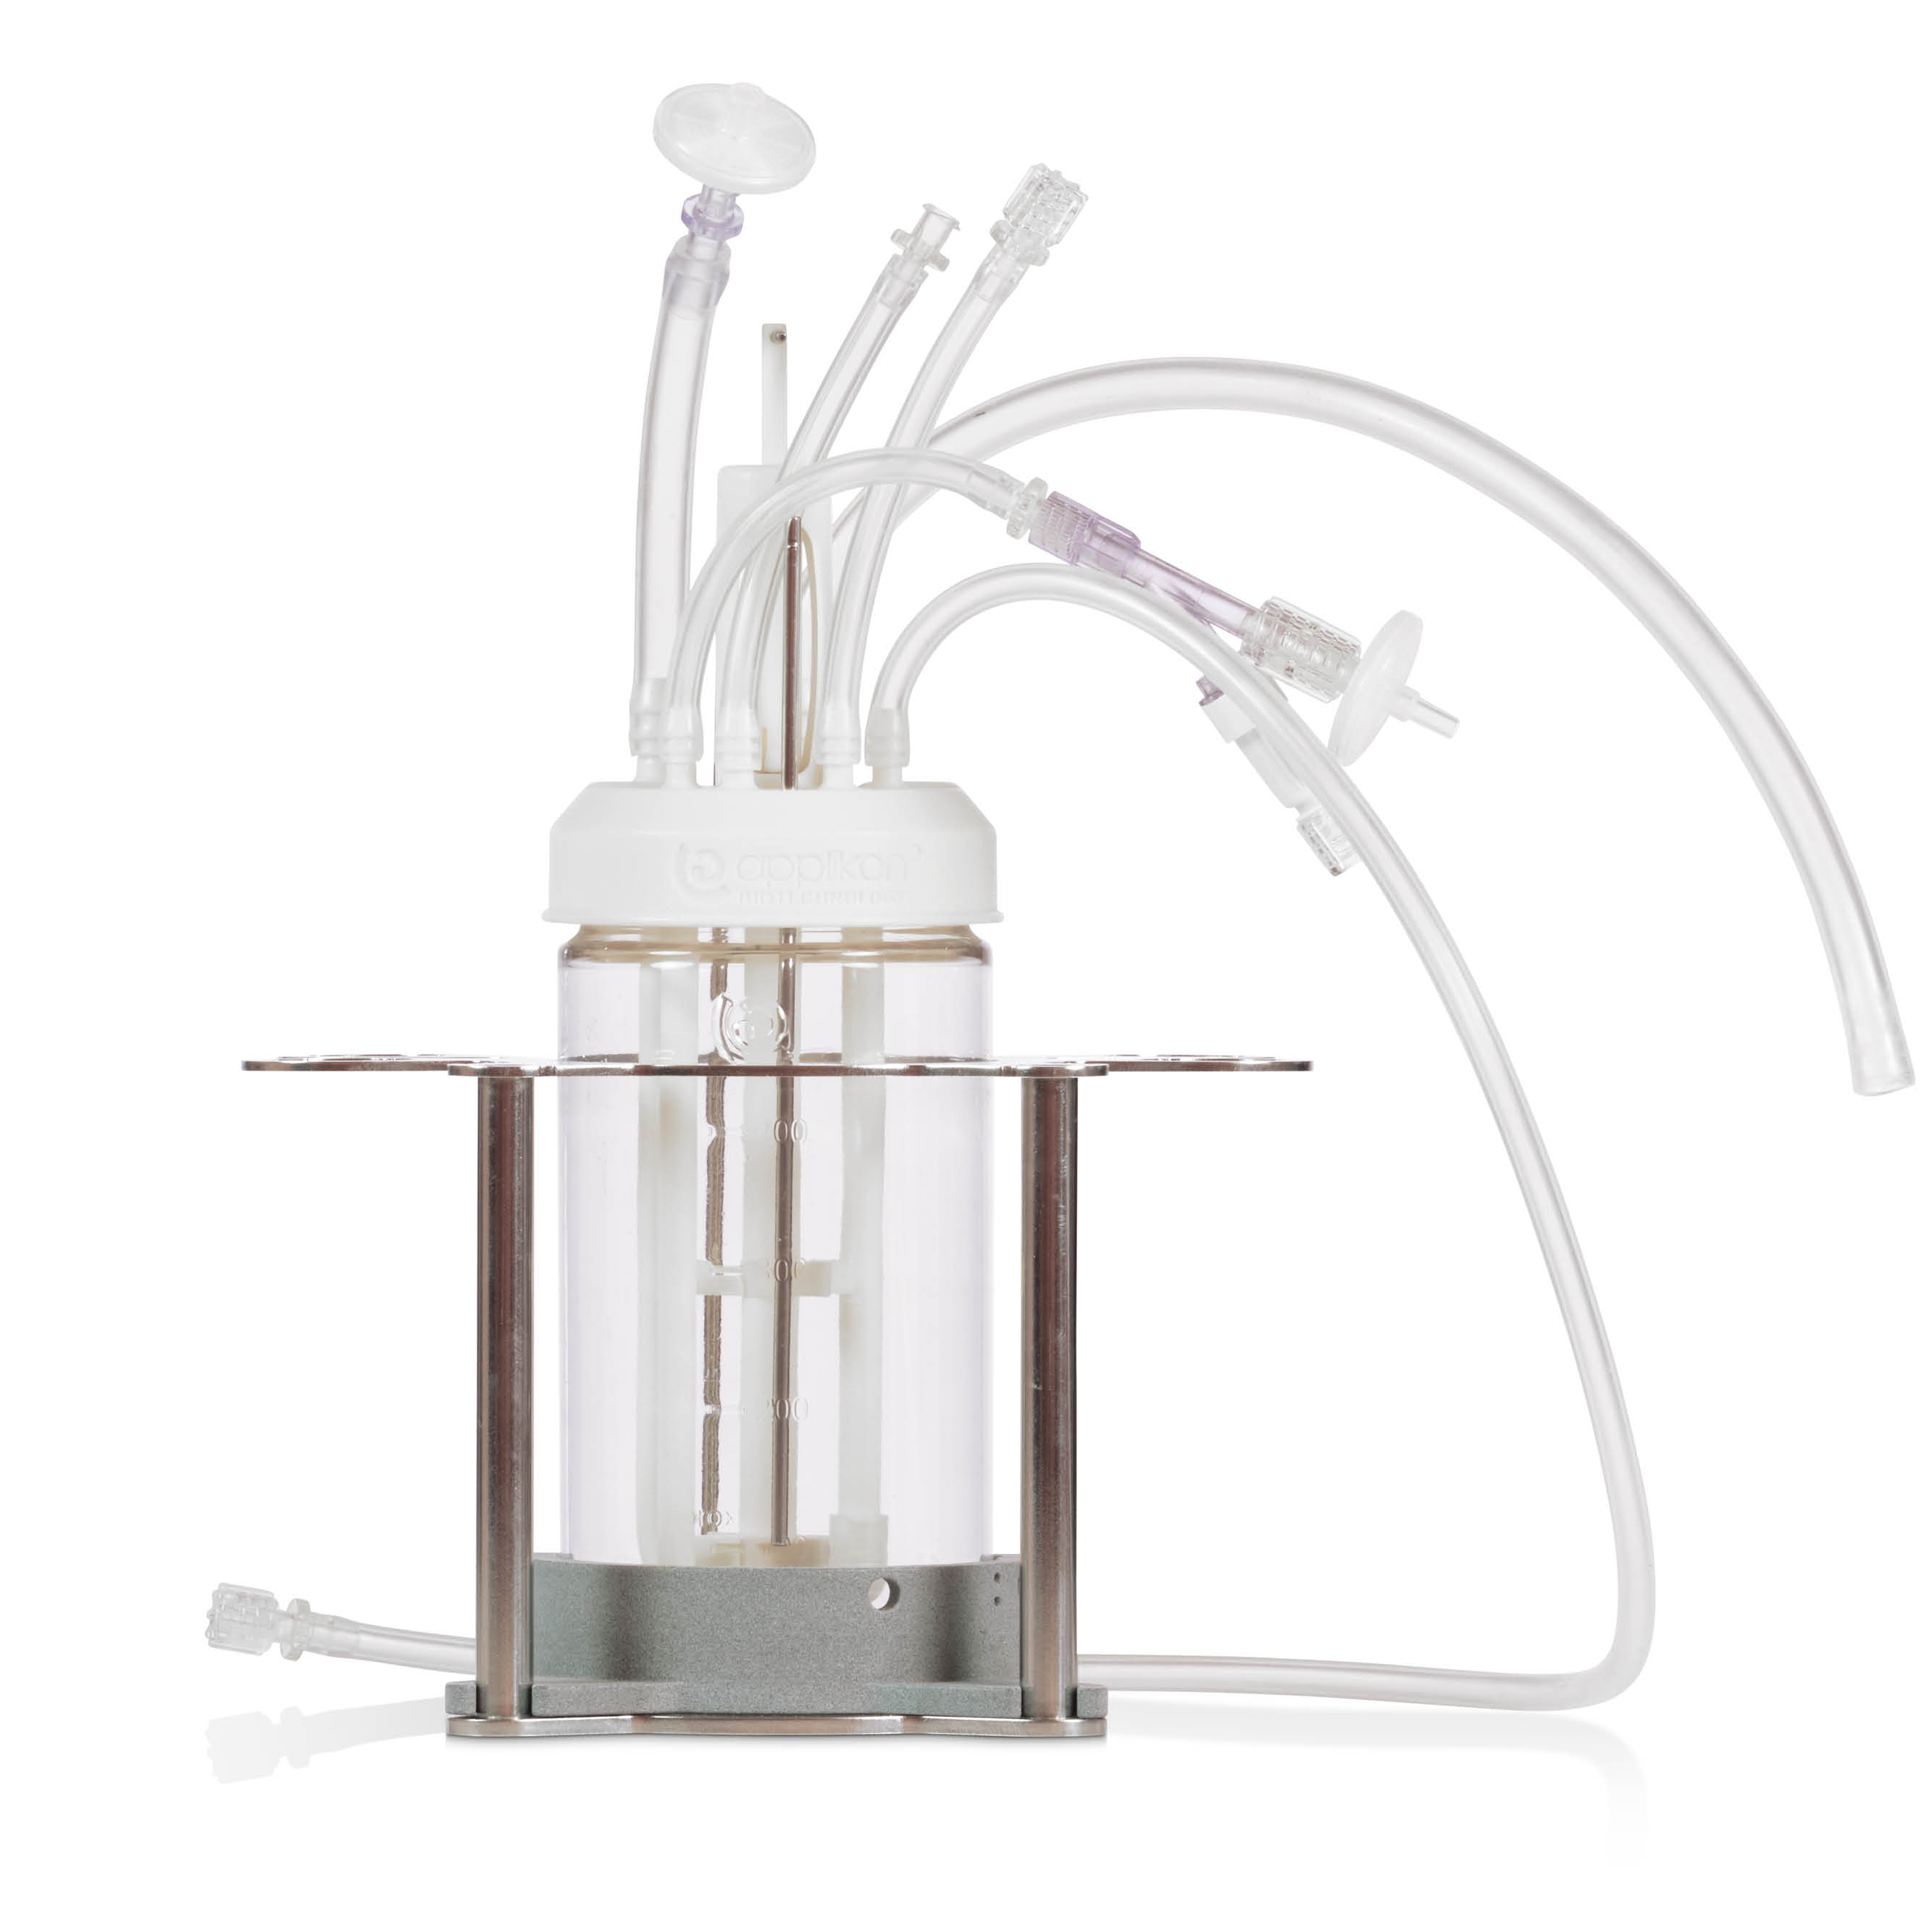 The 500 mL single-use bioreactor for clinical applications